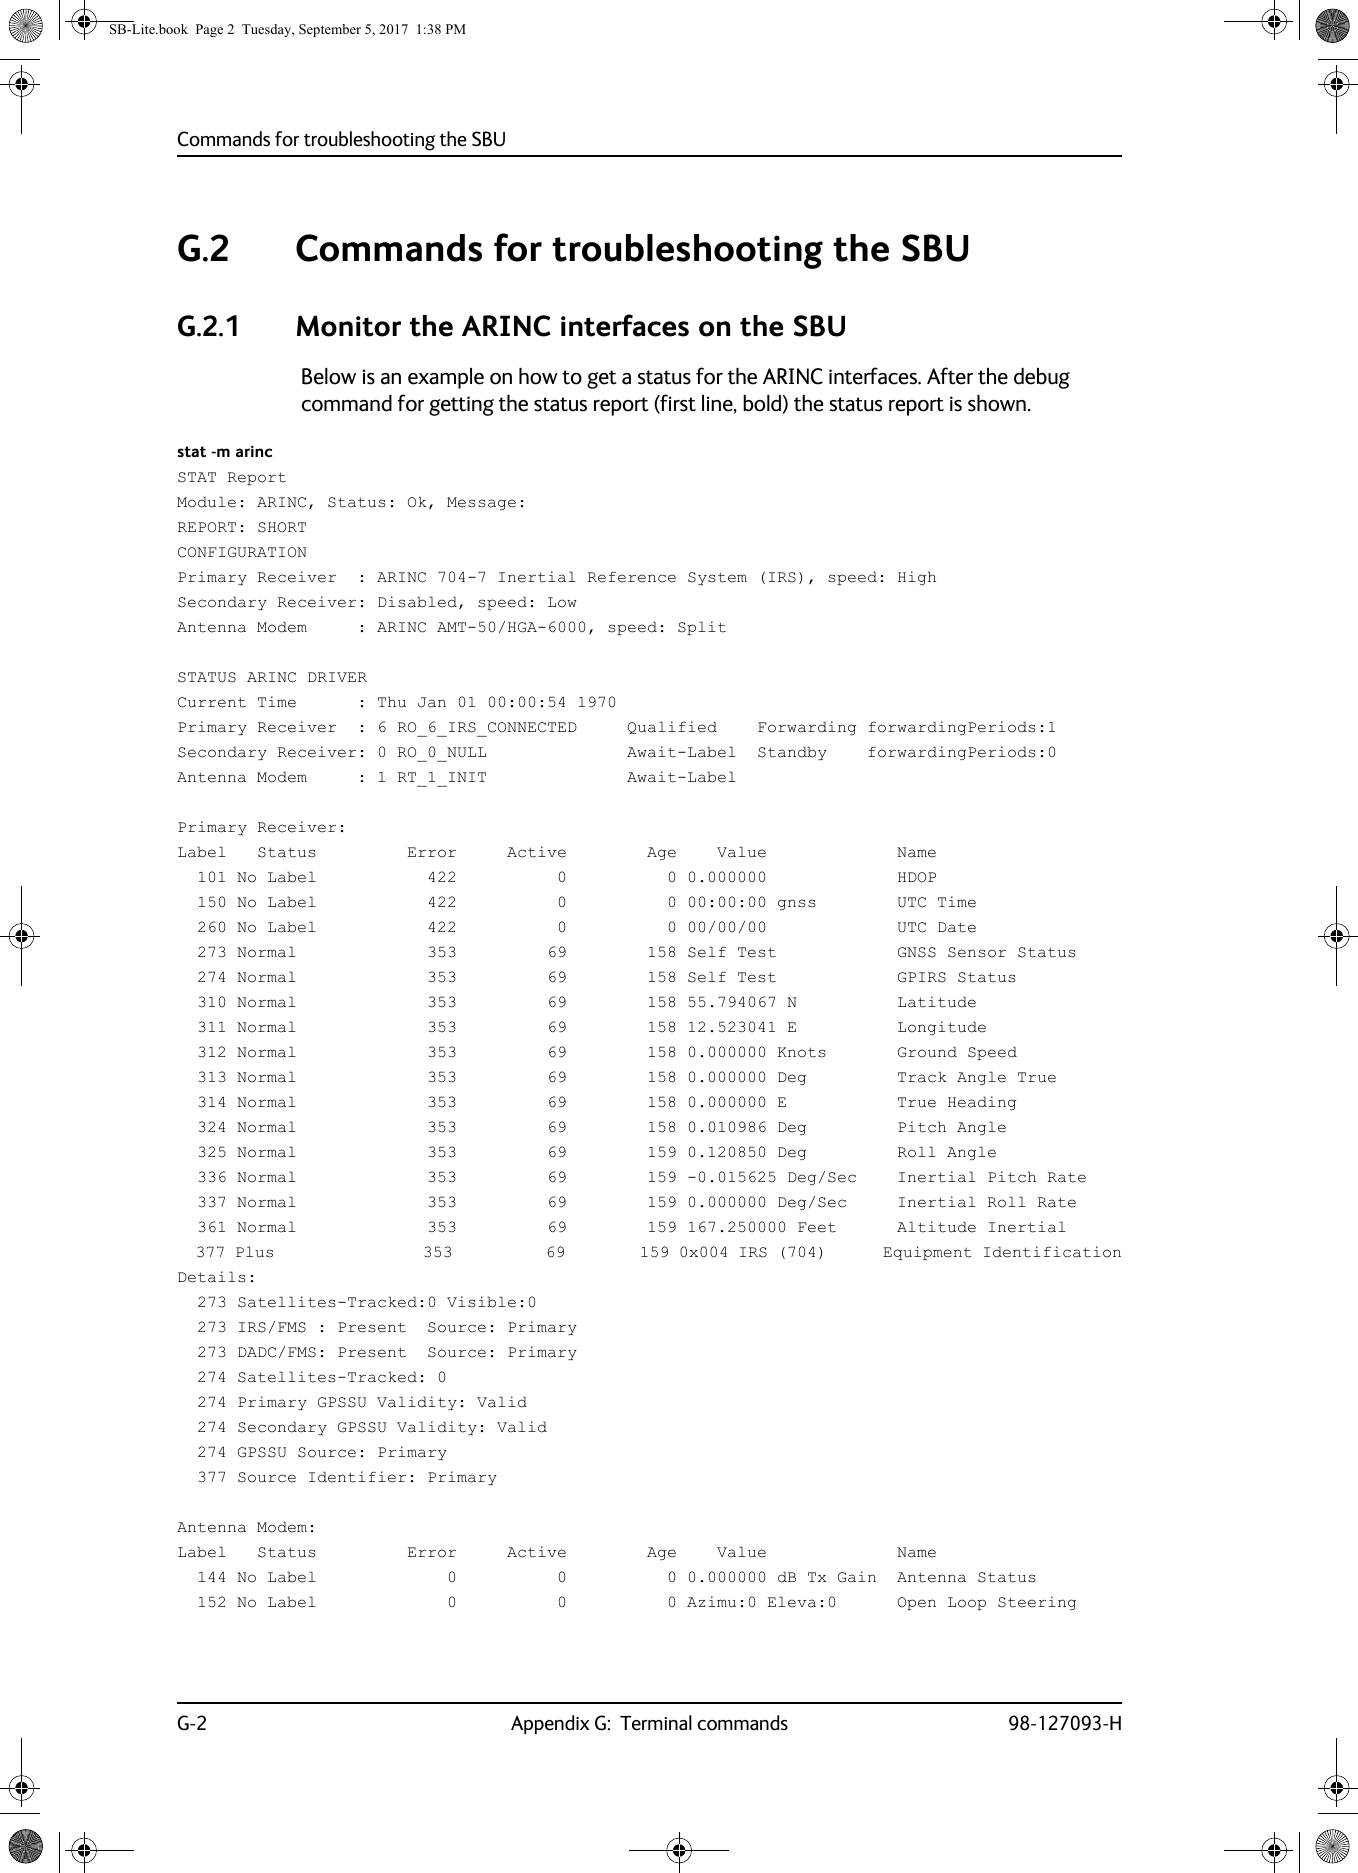 Commands for troubleshooting the SBUG-2 Appendix G:  Terminal commands 98-127093-HG.2 Commands for troubleshooting the SBUG.2.1 Monitor the ARINC interfaces on the SBUBelow is an example on how to get a status for the ARINC interfaces. After the debug command for getting the status report (first line, bold) the status report is shown. stat -m arincSTAT ReportModule: ARINC, Status: Ok, Message:REPORT: SHORTCONFIGURATIONPrimary Receiver  : ARINC 704-7 Inertial Reference System (IRS), speed: HighSecondary Receiver: Disabled, speed: LowAntenna Modem     : ARINC AMT-50/HGA-6000, speed: Split STATUS ARINC DRIVERCurrent Time      : Thu Jan 01 00:00:54 1970Primary Receiver  : 6 RO_6_IRS_CONNECTED     Qualified    Forwarding forwardingPeriods:1Secondary Receiver: 0 RO_0_NULL              Await-Label  Standby    forwardingPeriods:0Antenna Modem     : 1 RT_1_INIT              Await-LabelPrimary Receiver:Label   Status         Error     Active        Age    Value             Name  101 No Label           422          0          0 0.000000             HDOP  150 No Label           422          0          0 00:00:00 gnss        UTC Time  260 No Label           422          0          0 00/00/00             UTC Date  273 Normal             353         69        158 Self Test            GNSS Sensor Status  274 Normal             353         69        158 Self Test            GPIRS Status  310 Normal             353         69        158 55.794067 N          Latitude  311 Normal             353         69        158 12.523041 E          Longitude  312 Normal             353         69        158 0.000000 Knots       Ground Speed  313 Normal             353         69        158 0.000000 Deg         Track Angle True  314 Normal             353         69        158 0.000000 E           True Heading  324 Normal             353         69        158 0.010986 Deg         Pitch Angle  325 Normal             353         69        159 0.120850 Deg         Roll Angle  336 Normal             353         69        159 -0.015625 Deg/Sec    Inertial Pitch Rate  337 Normal             353         69        159 0.000000 Deg/Sec     Inertial Roll Rate  361 Normal             353         69        159 167.250000 Feet      Altitude Inertial  377 Plus                353          69        159 0x004 IRS (704)      Equipment IdentificationDetails:  273 Satellites-Tracked:0 Visible:0  273 IRS/FMS : Present  Source: Primary  273 DADC/FMS: Present  Source: Primary  274 Satellites-Tracked: 0  274 Primary GPSSU Validity: Valid  274 Secondary GPSSU Validity: Valid  274 GPSSU Source: Primary  377 Source Identifier: PrimaryAntenna Modem:Label   Status         Error     Active        Age    Value             Name  144 No Label             0          0          0 0.000000 dB Tx Gain  Antenna Status  152 No Label             0          0          0 Azimu:0 Eleva:0      Open Loop SteeringSB-Lite.book  Page 2  Tuesday, September 5, 2017  1:38 PM